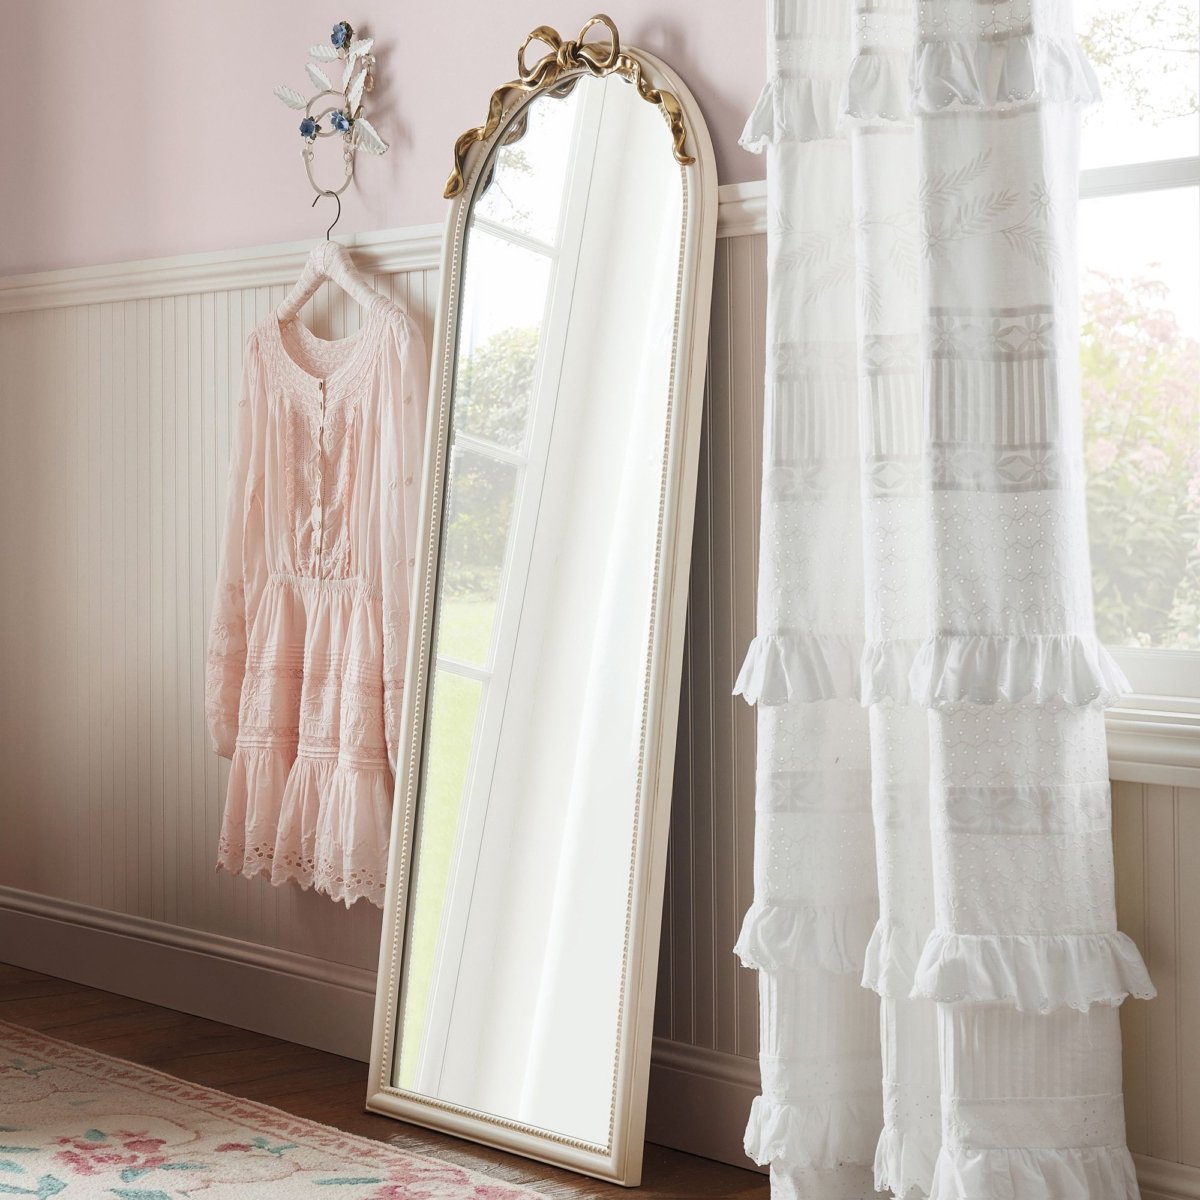 A coquette mirror hangs in a pink room with curtains and a dresser, perfect for tween bedroom ideas.